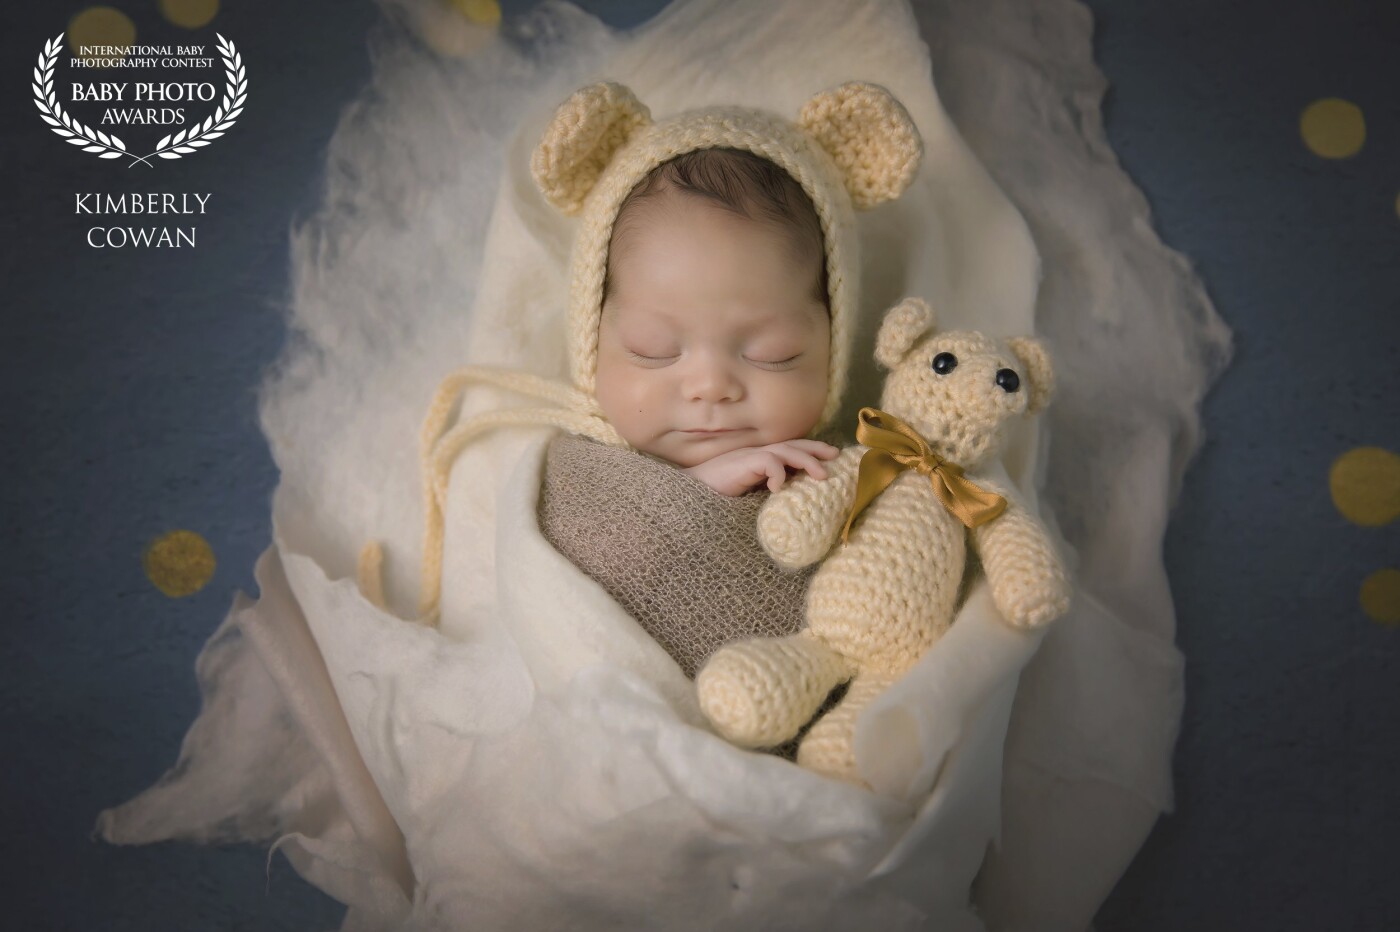 Do teddy bears dream?<br />
Baby Ian is a miracle NICU baby.  He spent his first 8 weeks of life in the hospital born at 34 weeks.   When momma brought him into the studio he was still a tiny guy at 5lbs but was so cuddly and didn't mind being posed for the camera.  